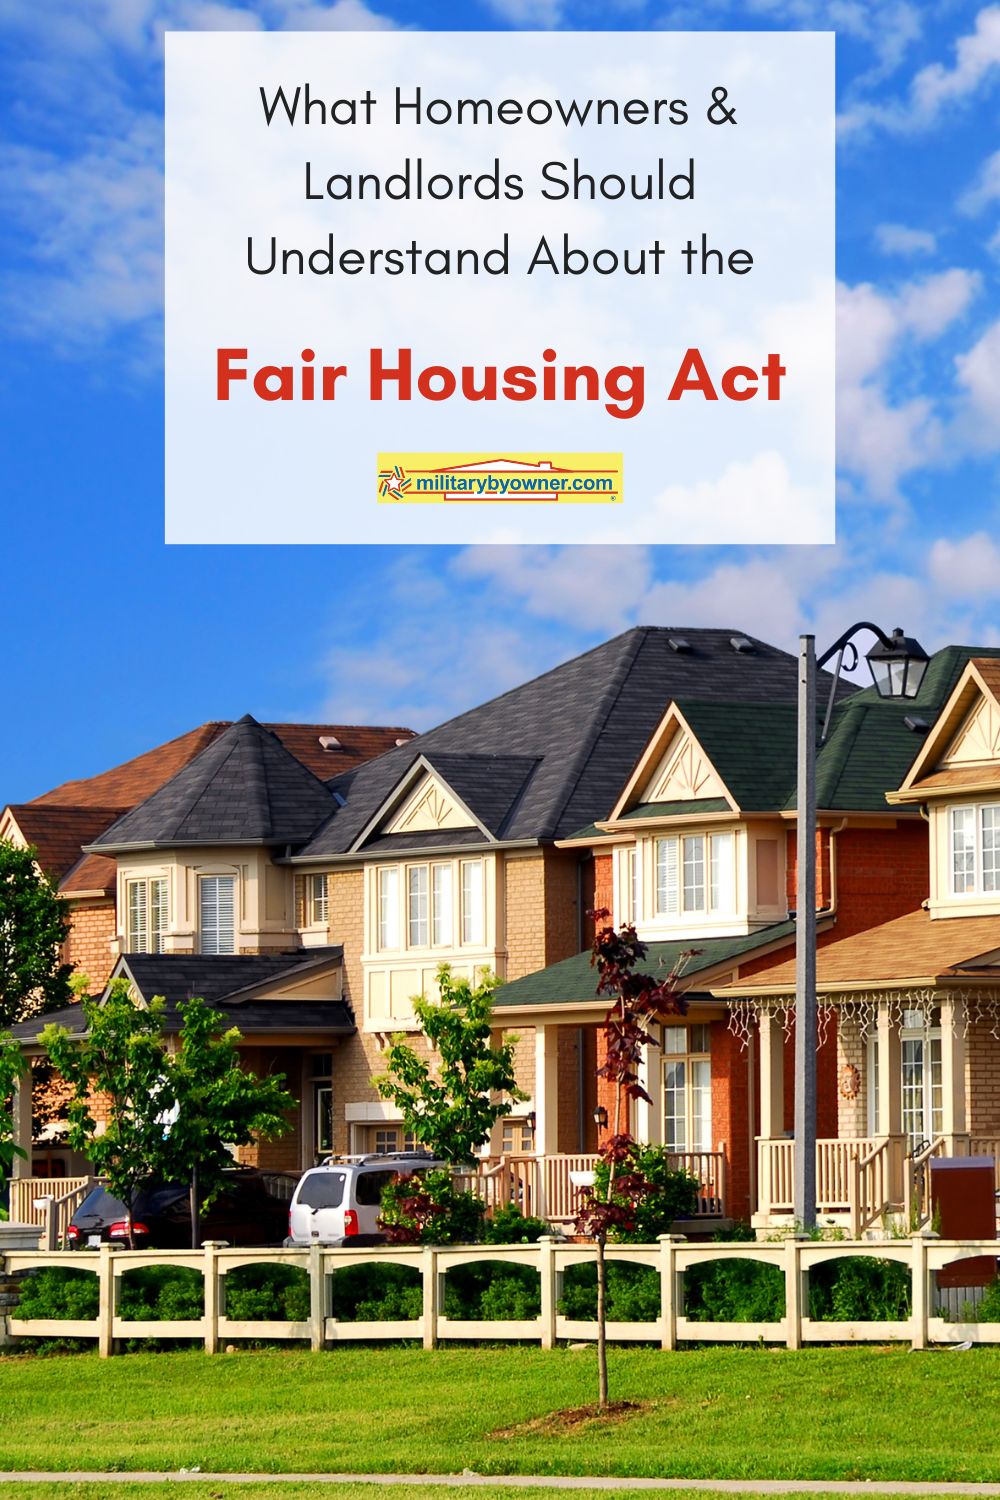 What_Homeowners_and_Landlords_Should_Understand_About_the_Fair_Housing_Act